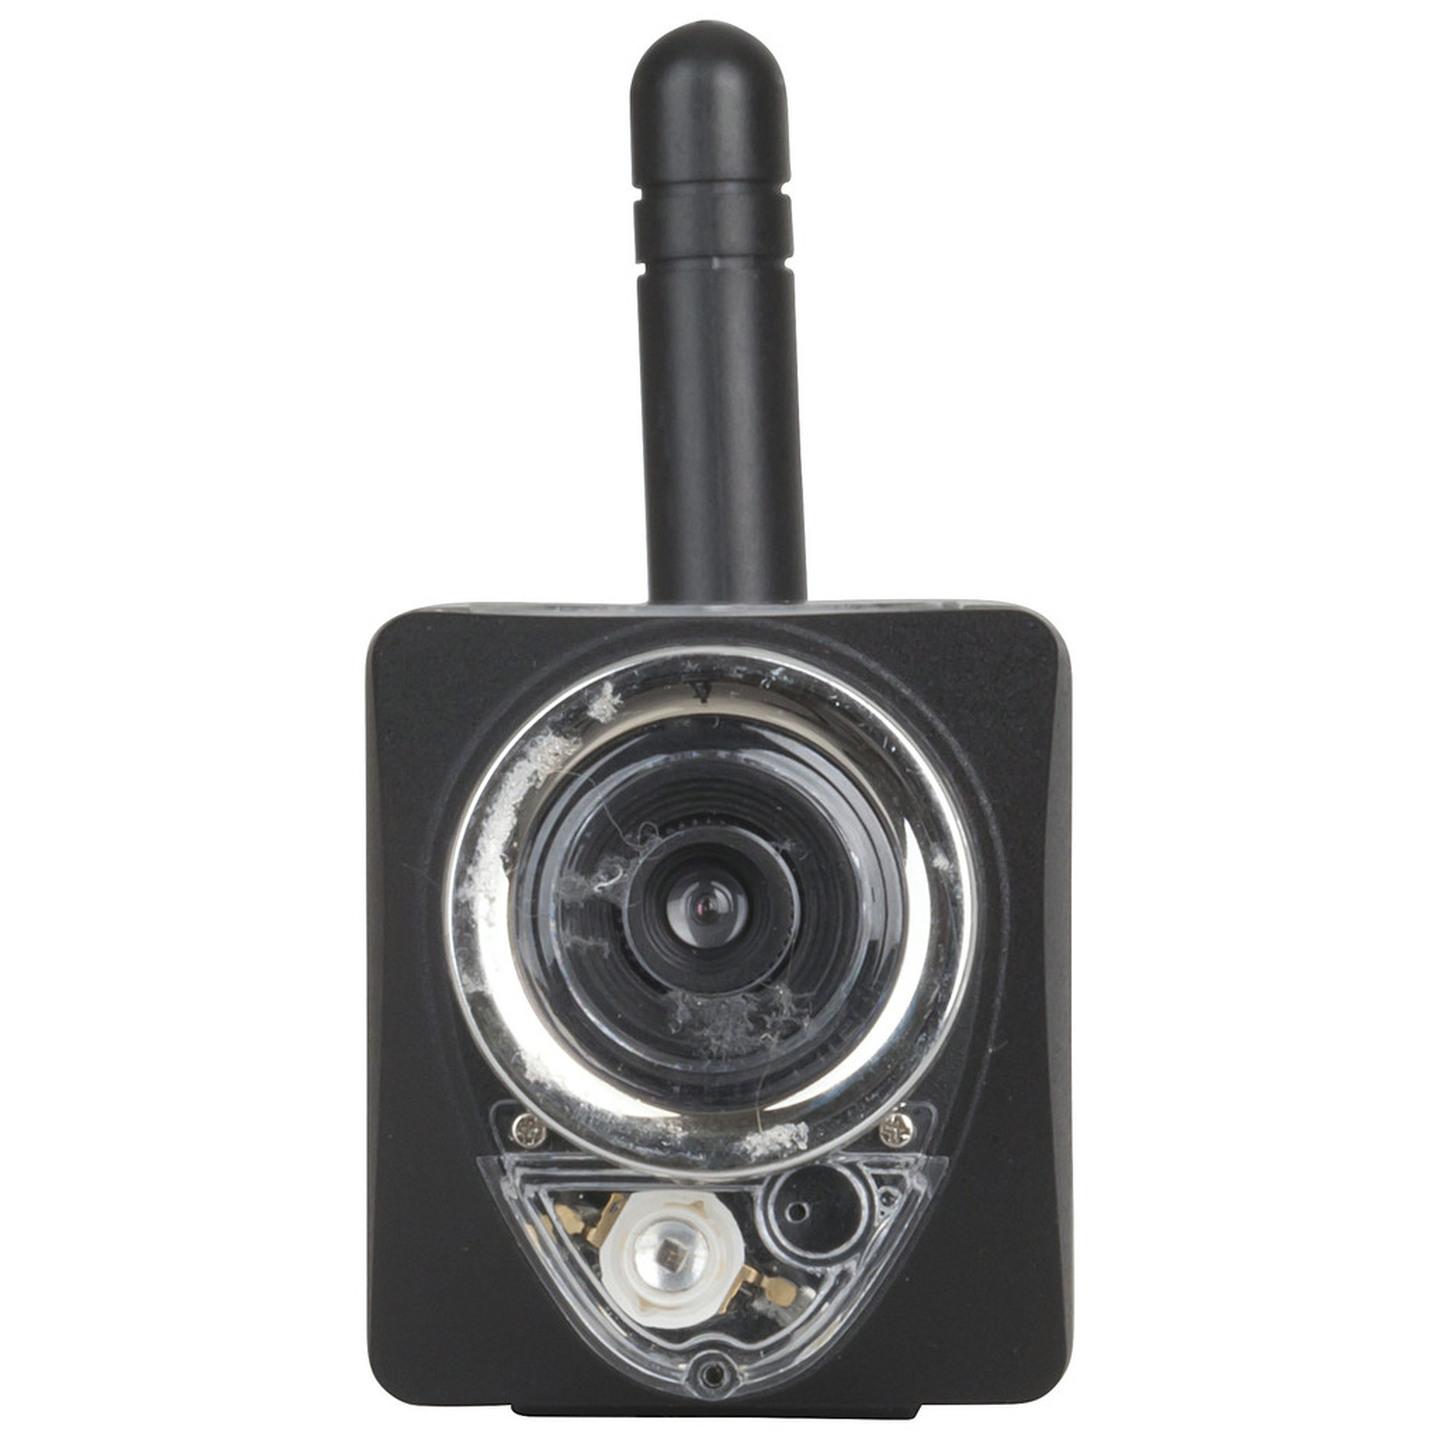 720p High Definition Indoor Rechargeable Wi-Fi Camera